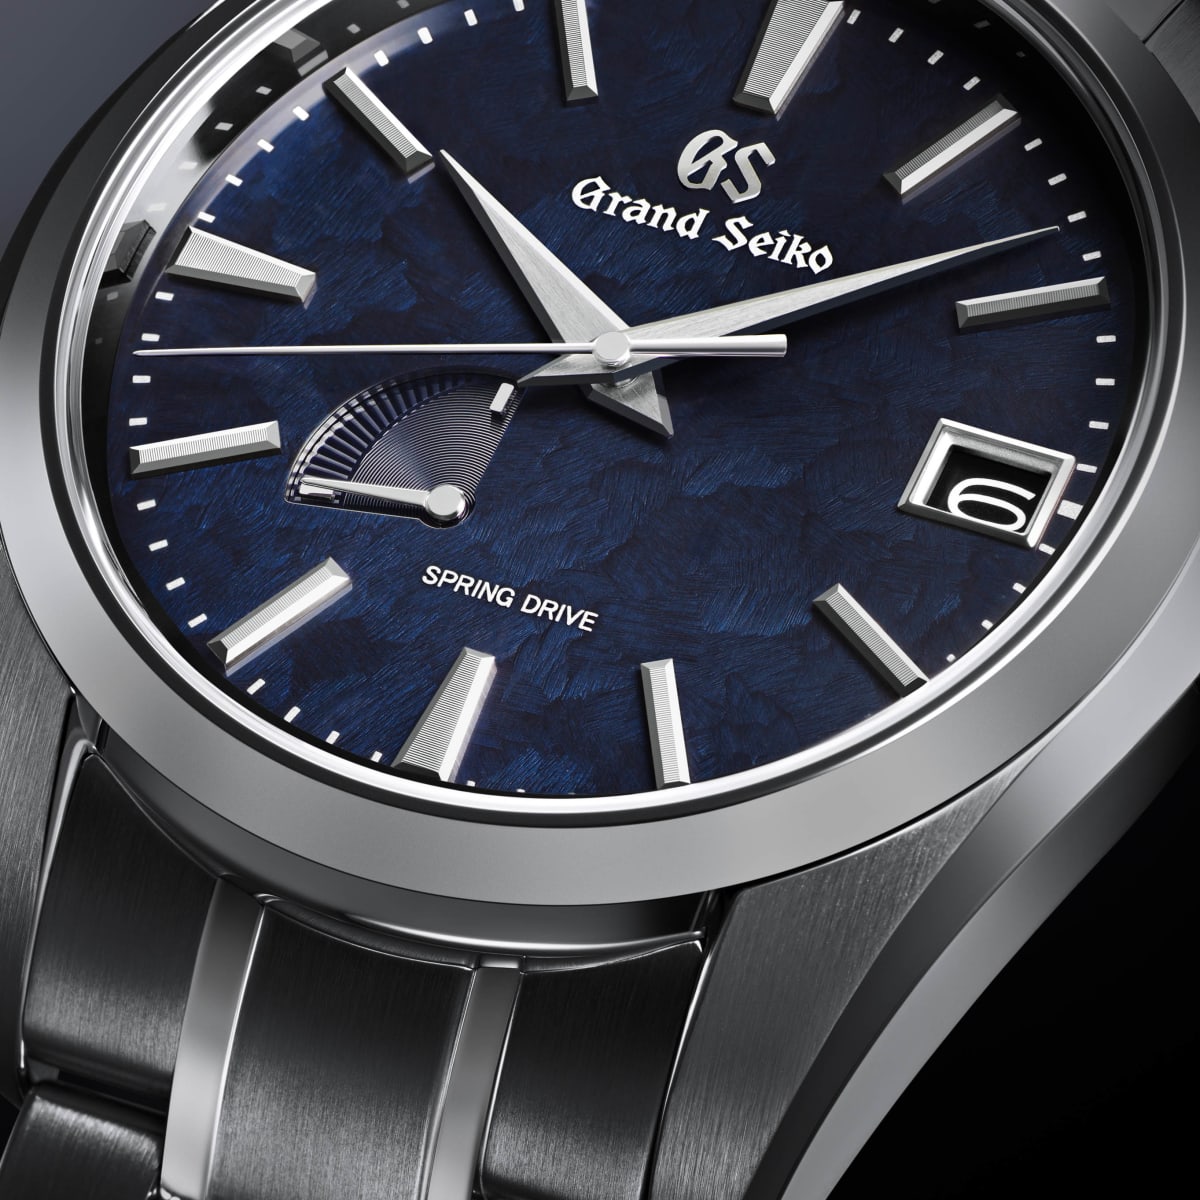 Grand Seiko debuts a new beauty in blue with the SBGA469 - Acquire